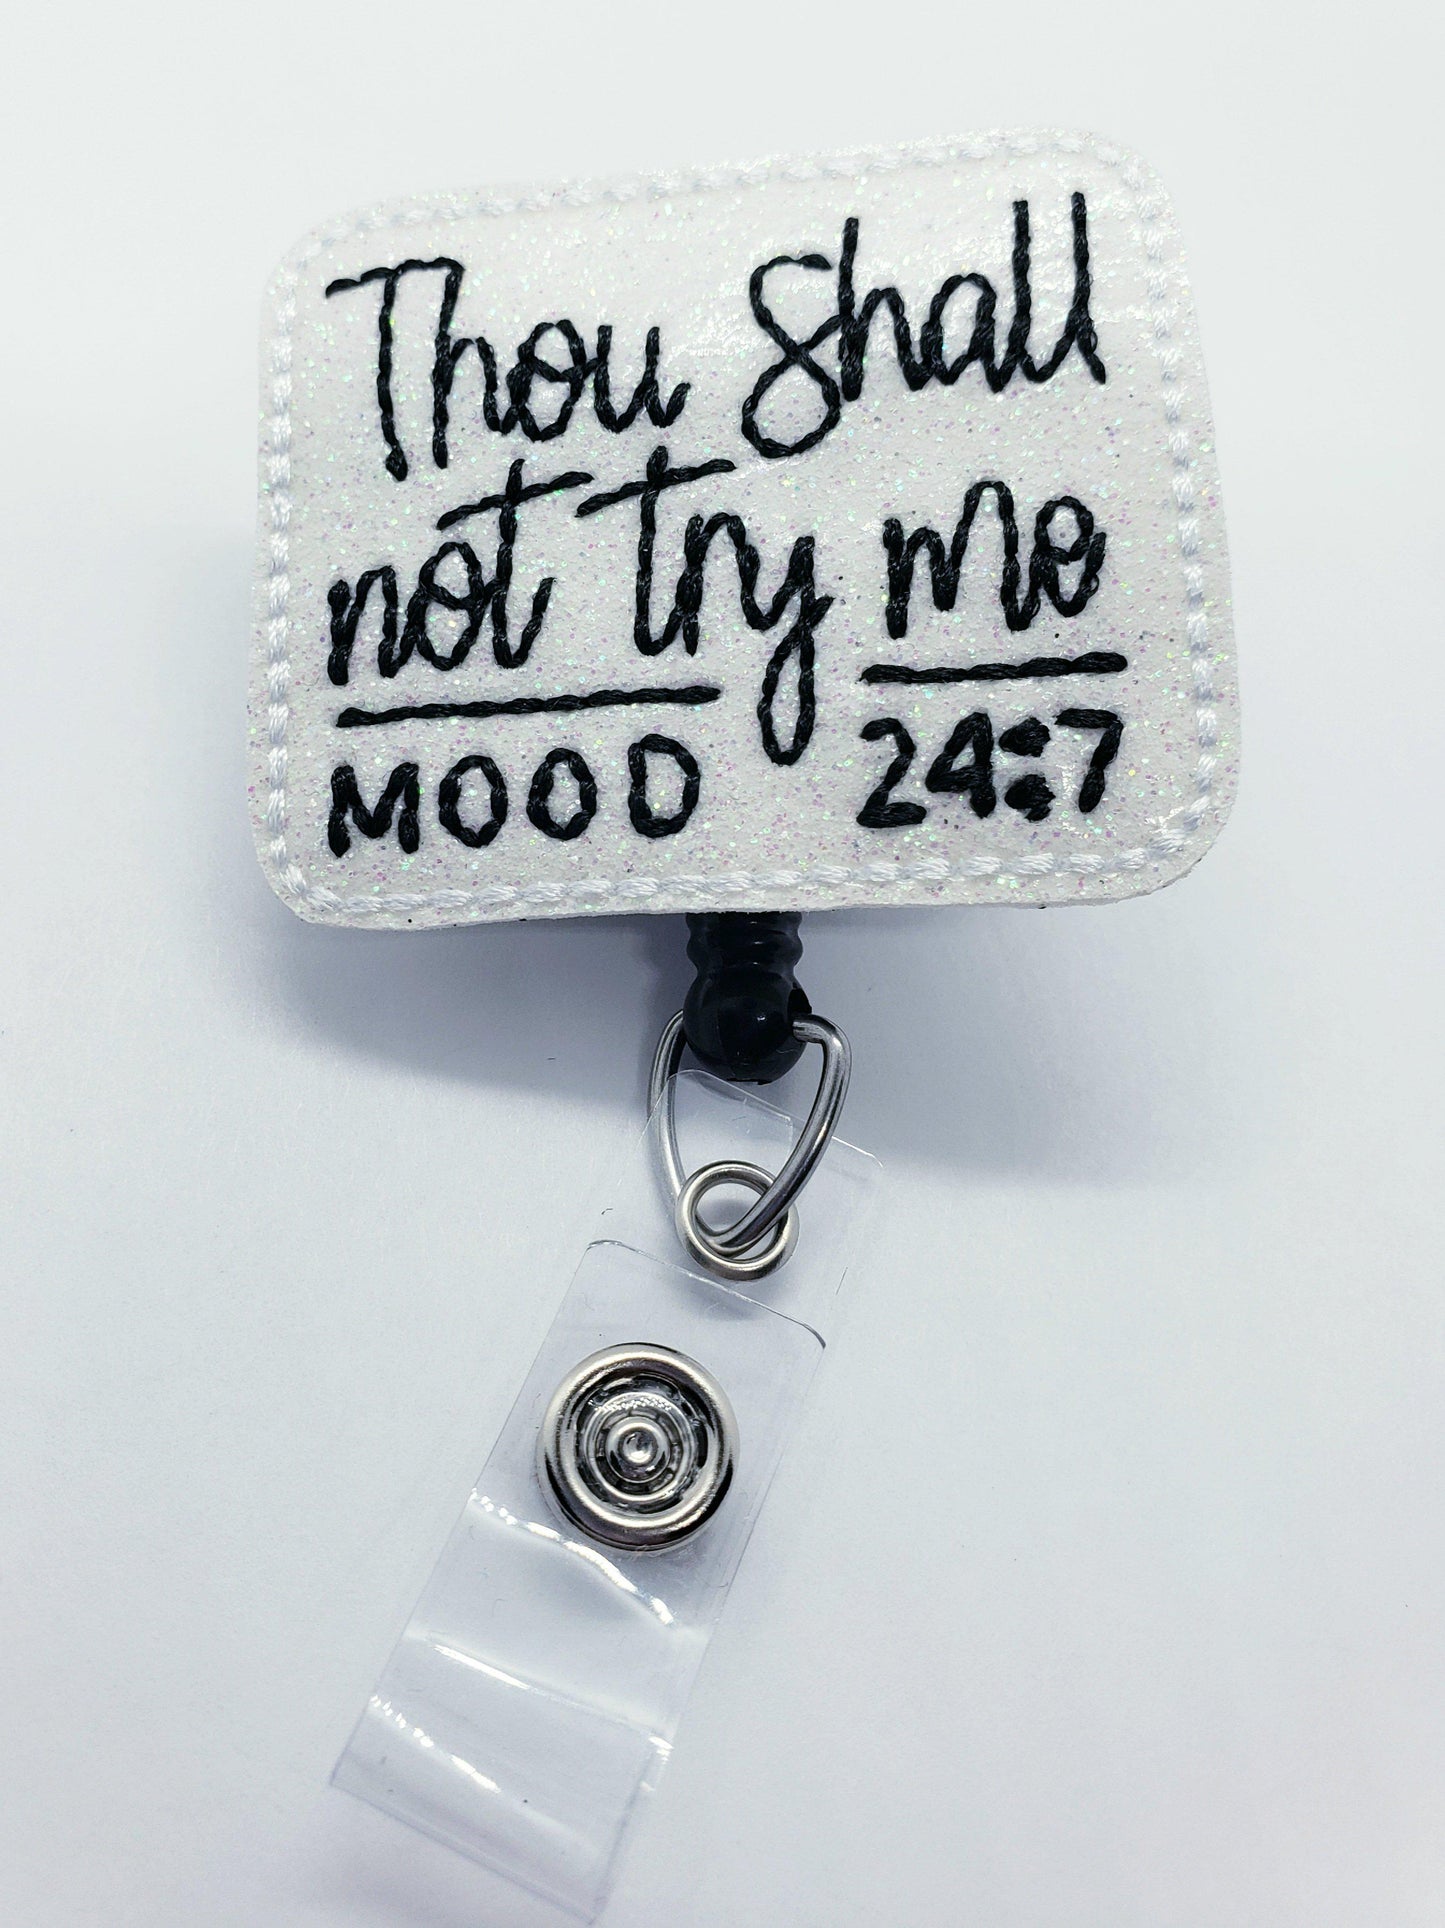 Thou Shall Not Try Me Badge Reel - YaYa Unique